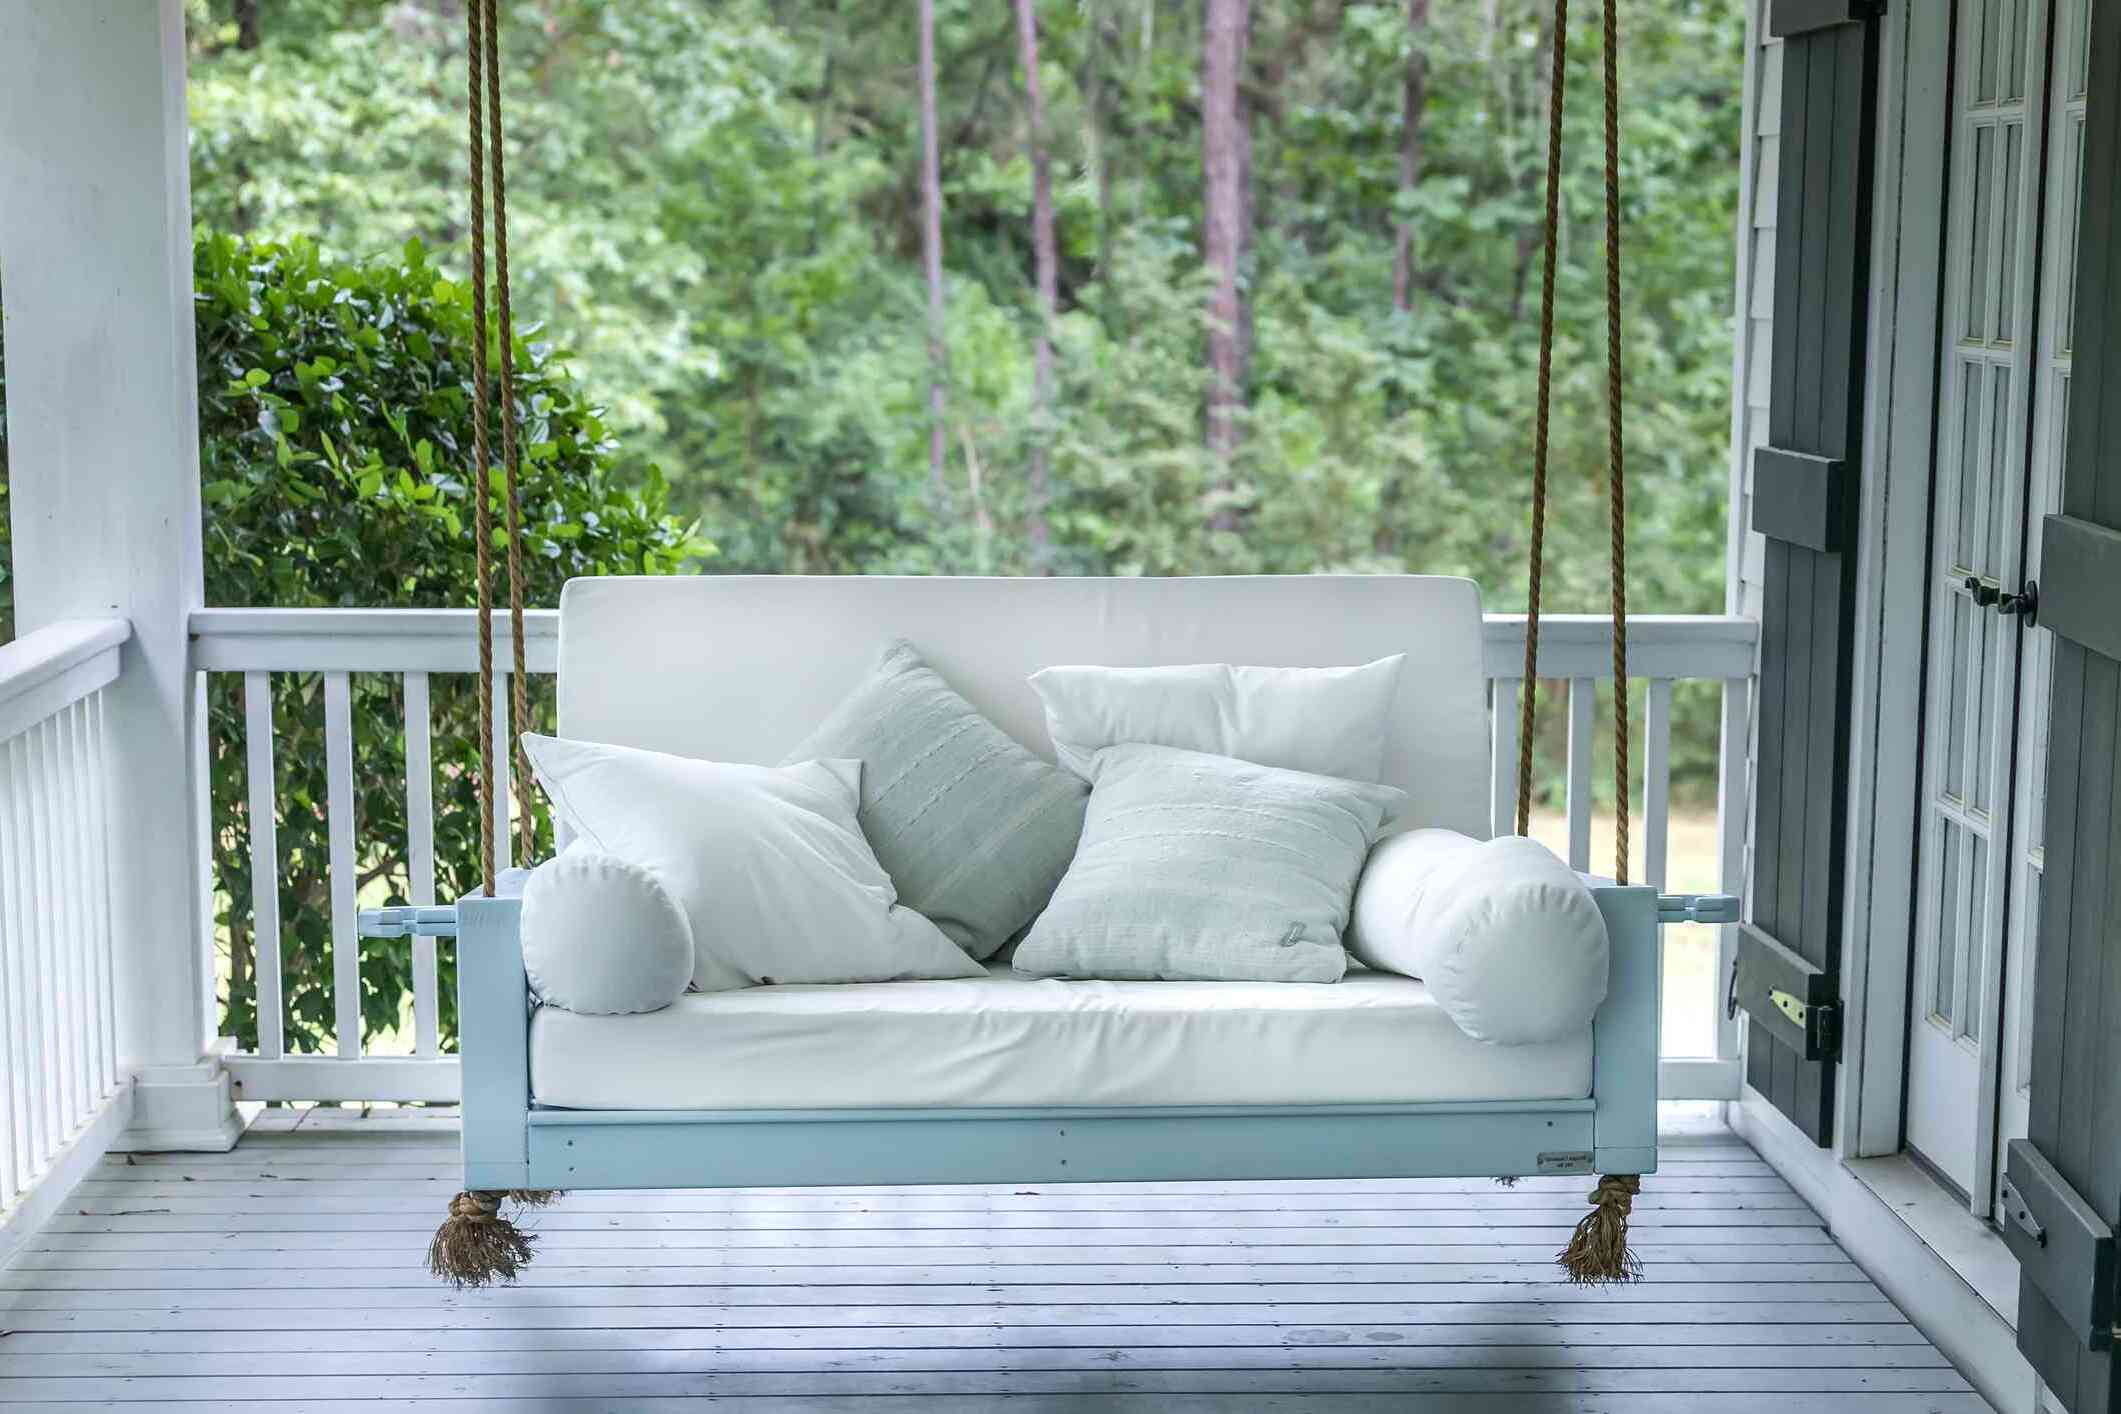 DIY Porch Swing Plans: Create Your Own Relaxation Spot